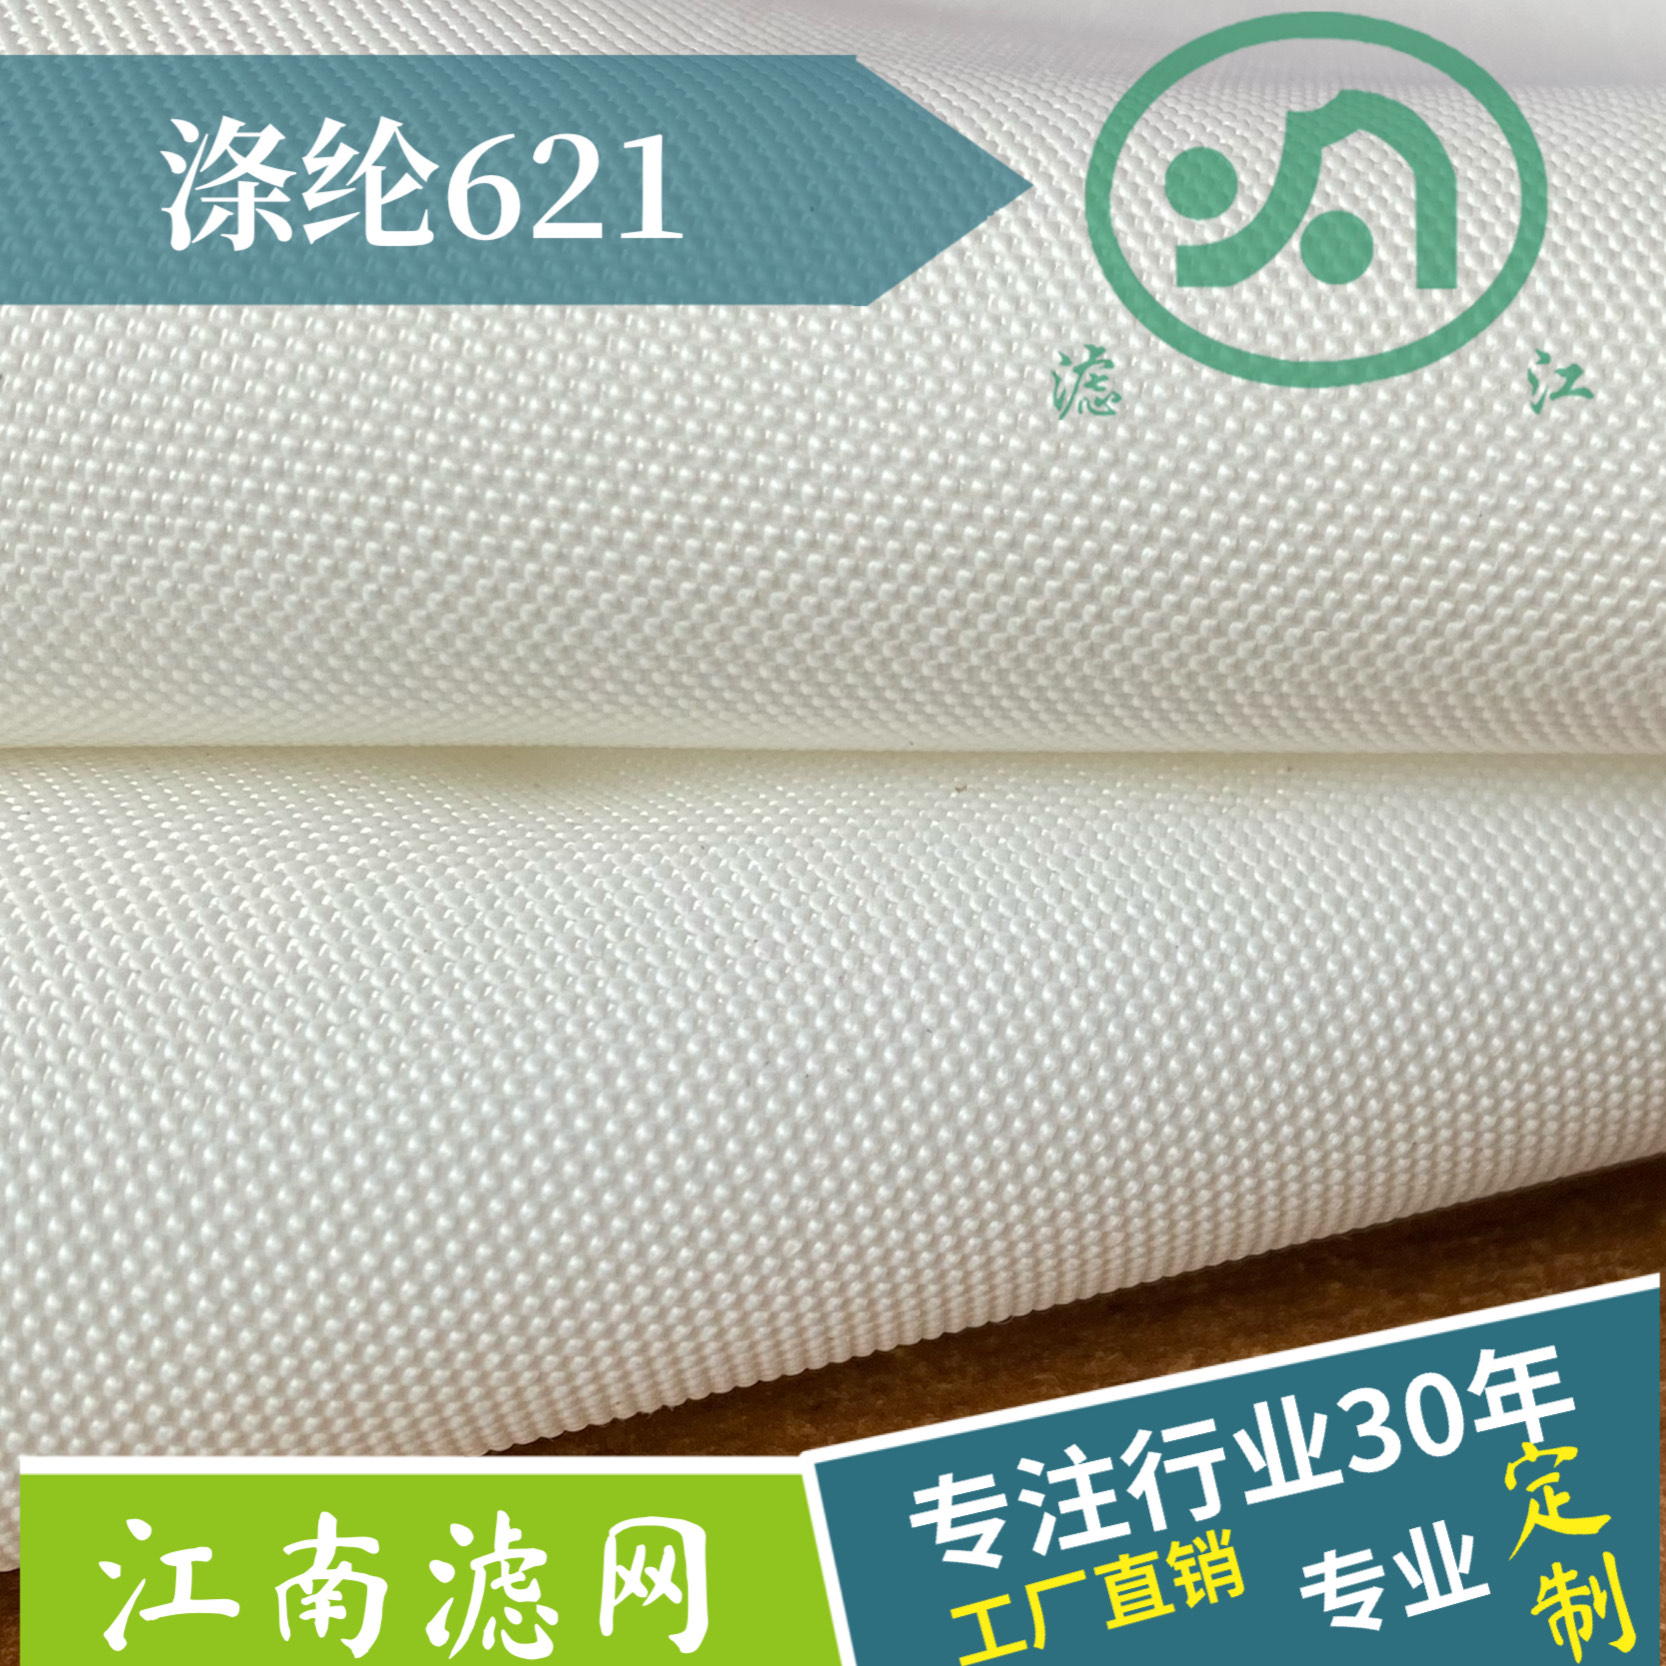 Polyester filter cloth621